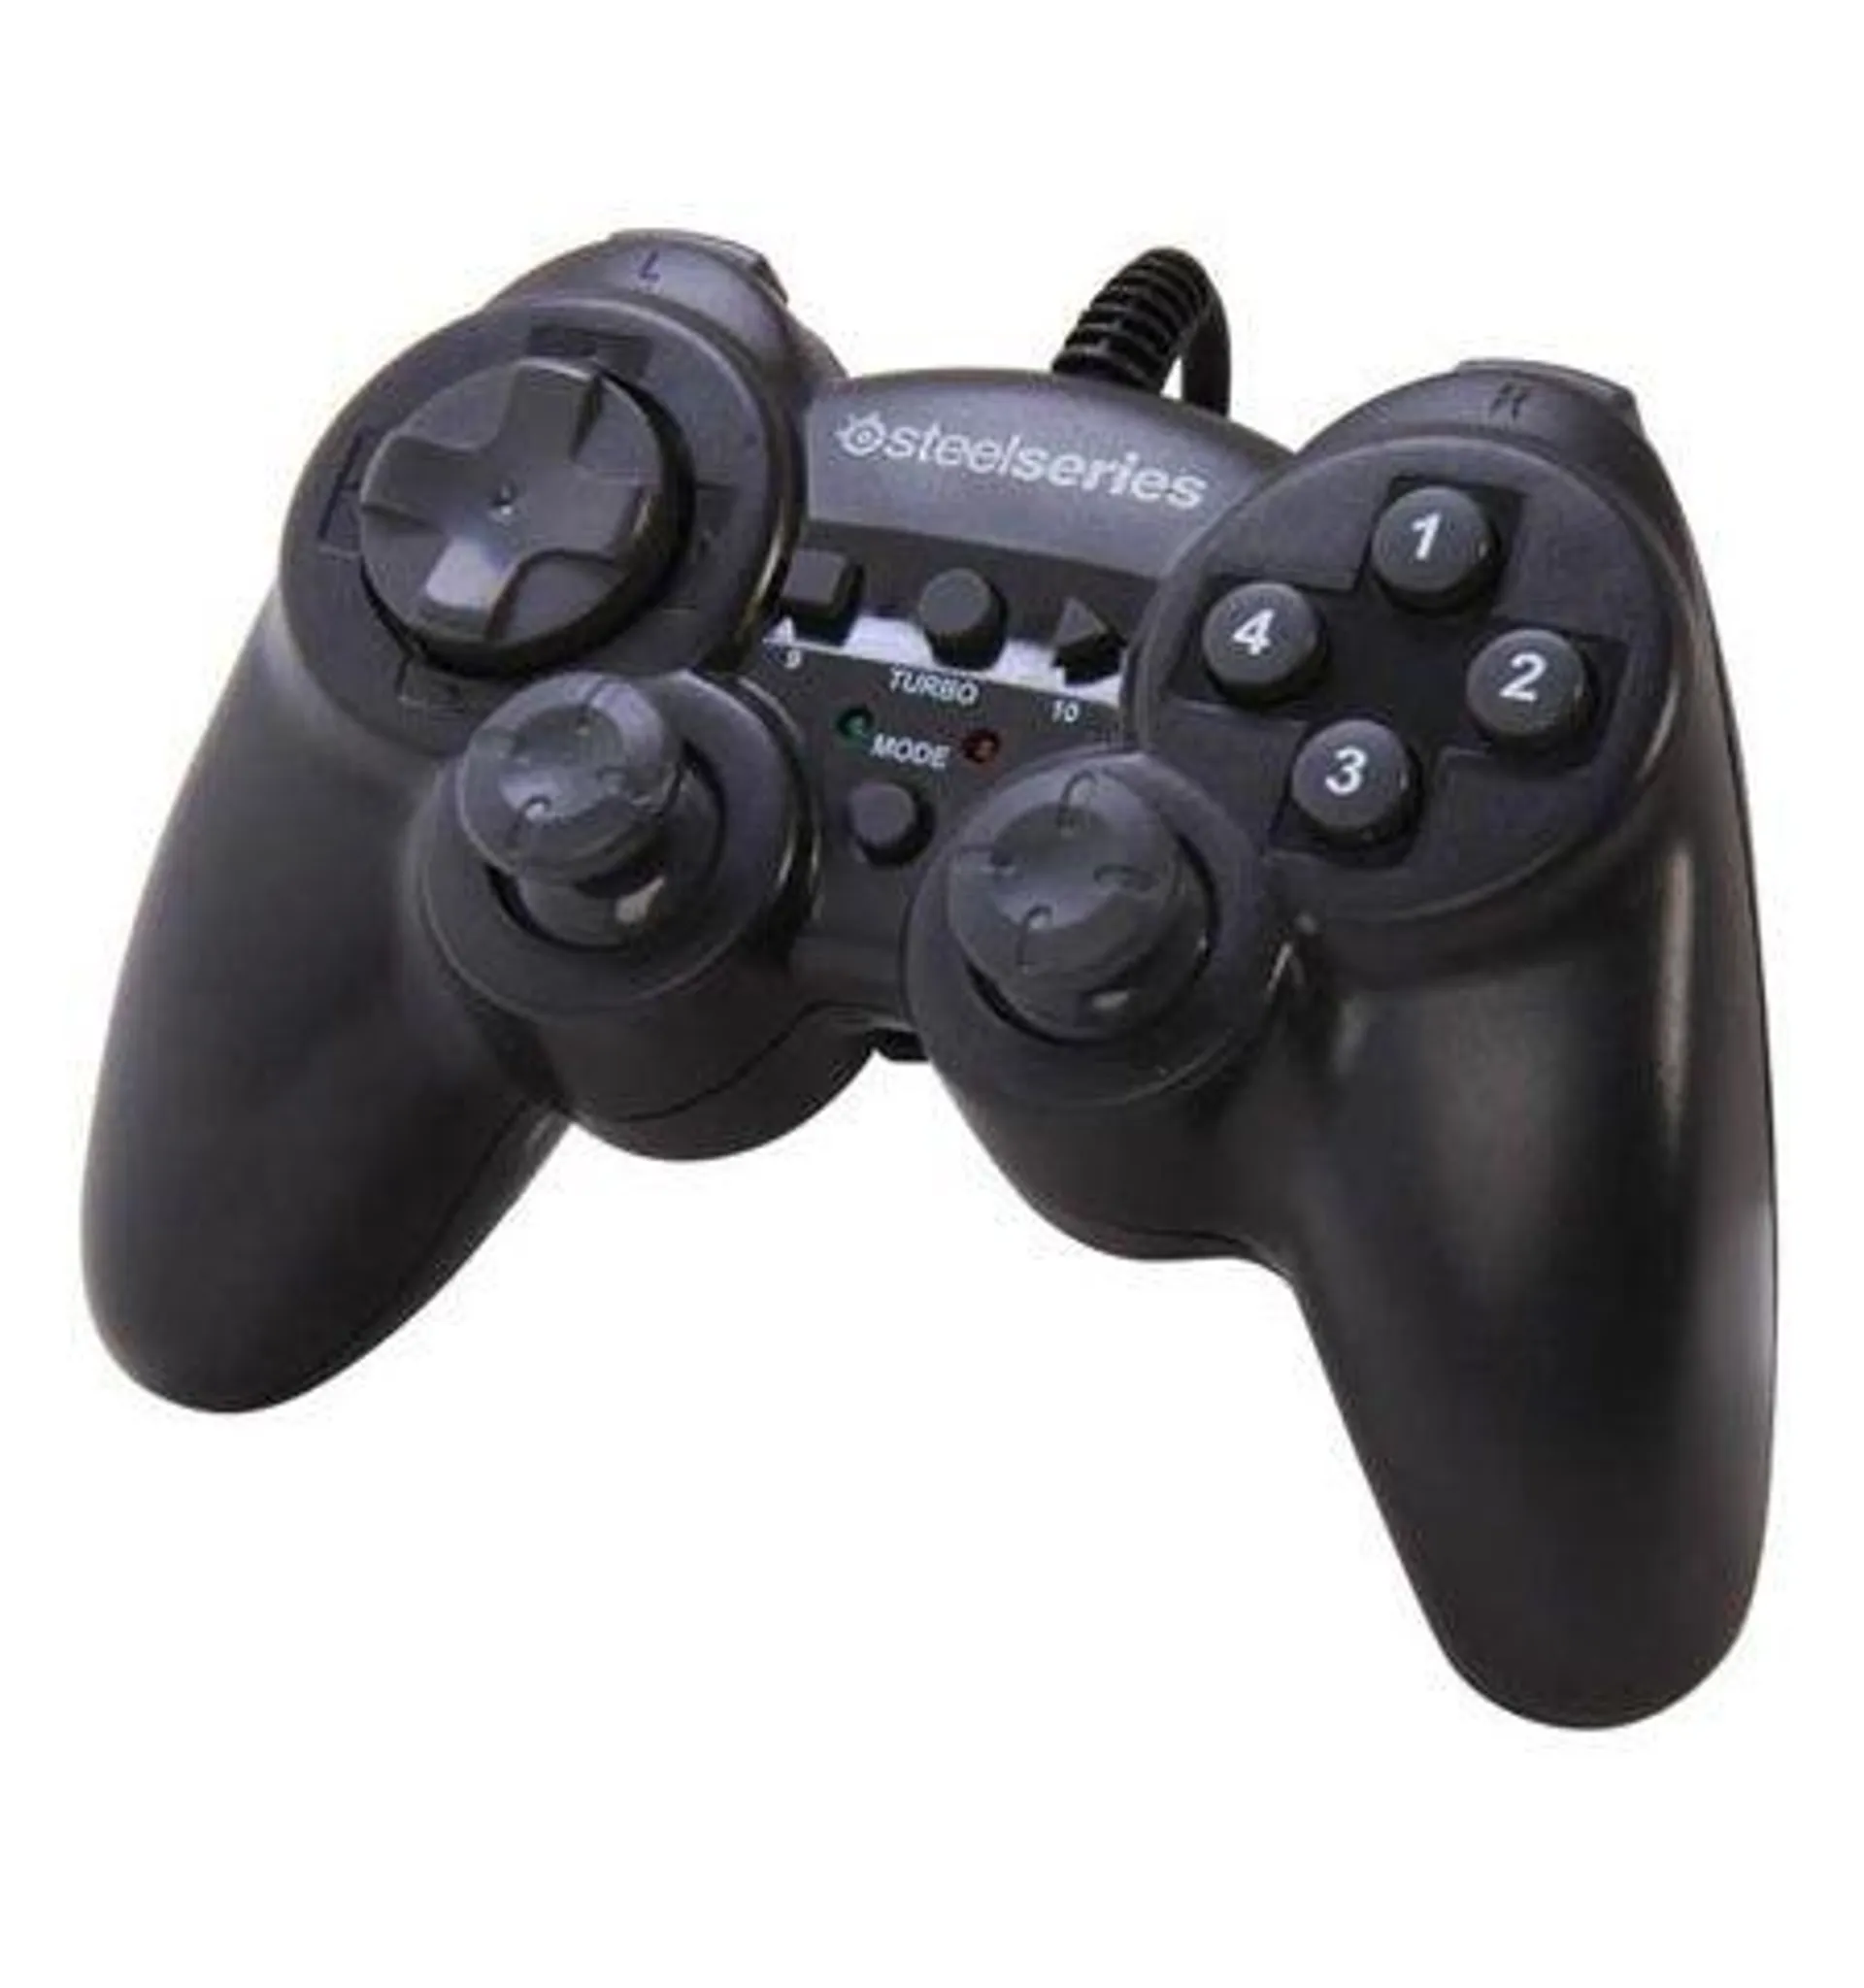 Steelseries USB Game Controller